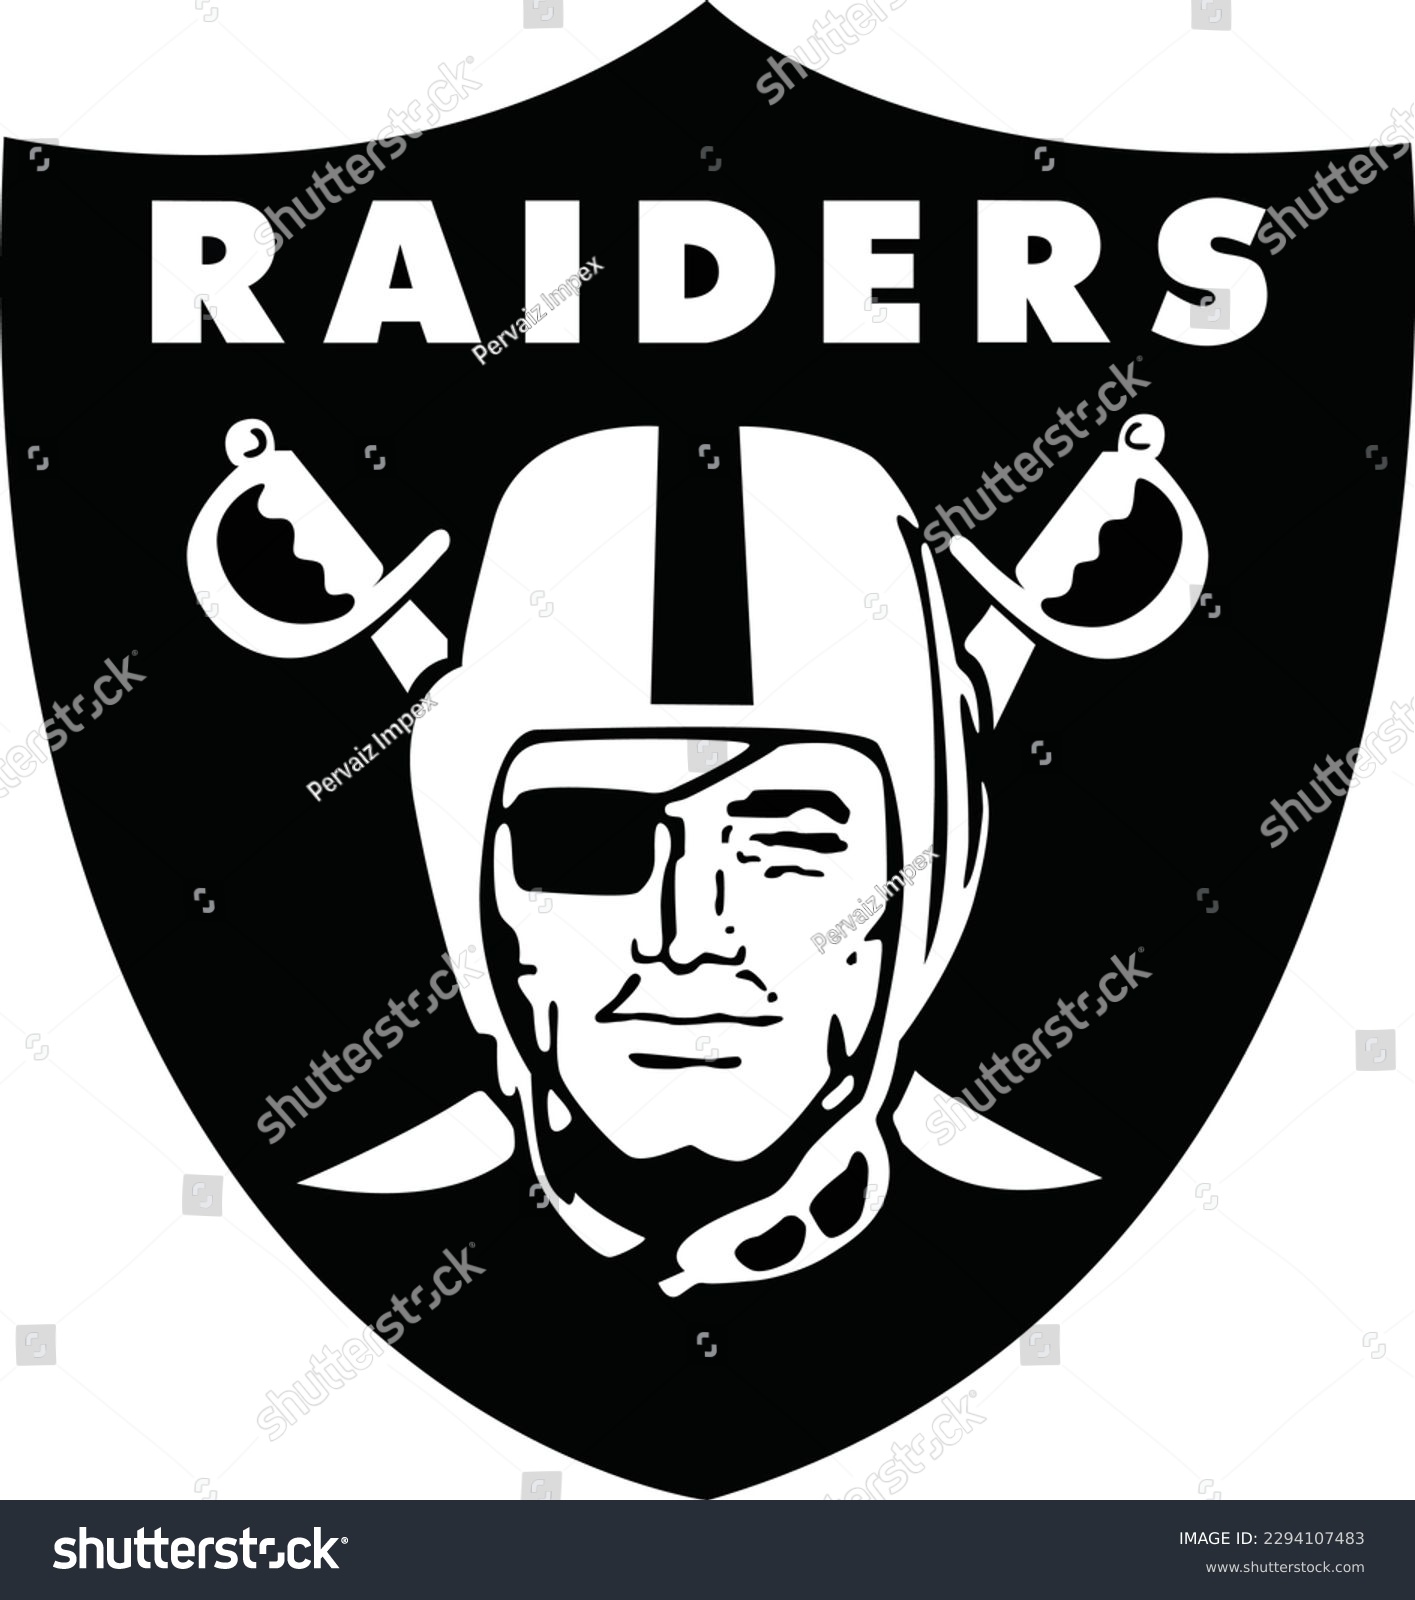 Raiders logo images stock photos d objects vectors